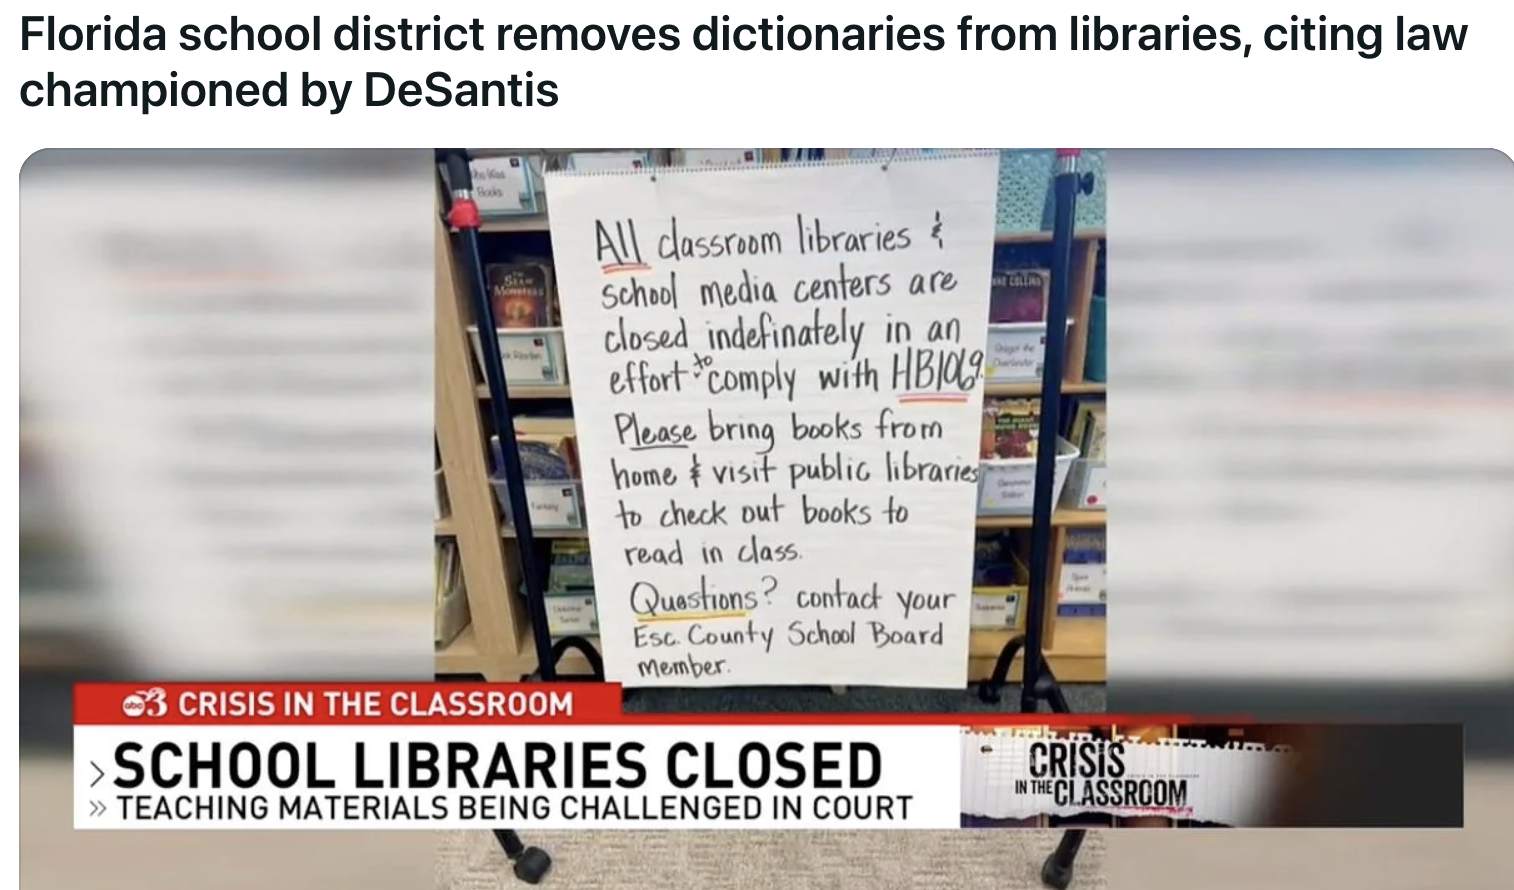 media - Florida school district removes dictionaries from libraries, citing law championed by DeSantis All classroom libraries & School media centers are closed indefinately in an effort comply with HB10g Please bring books from home visit public librarie